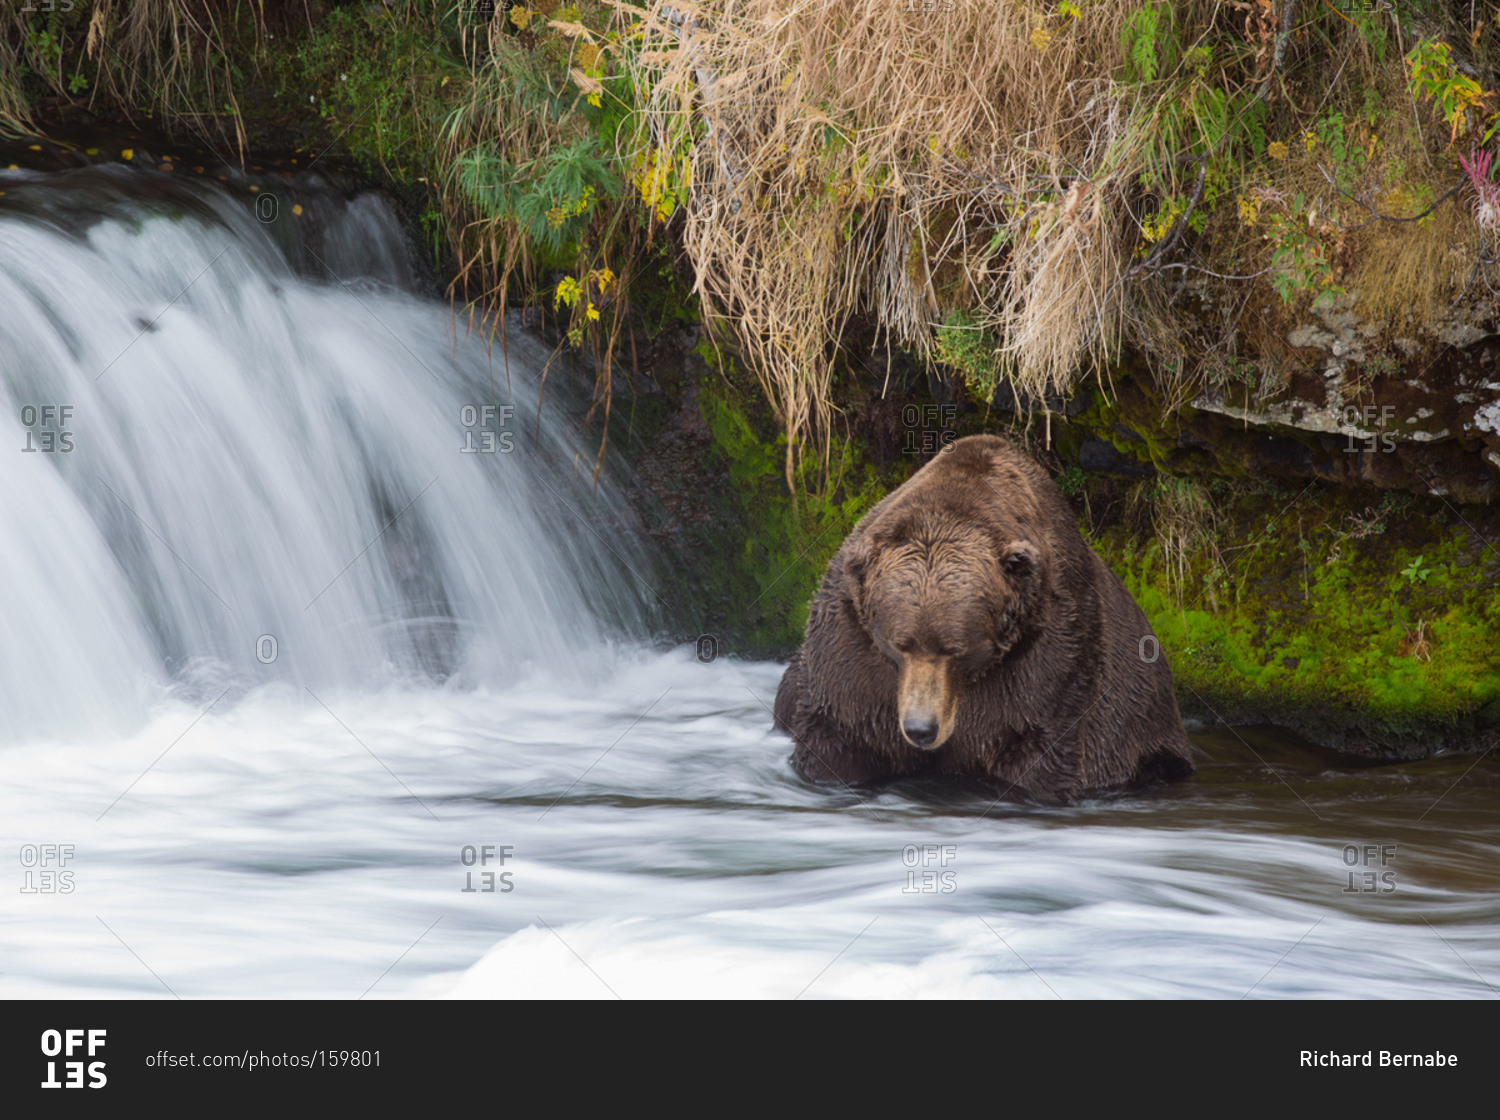 A coastal brown bear fishes in a river